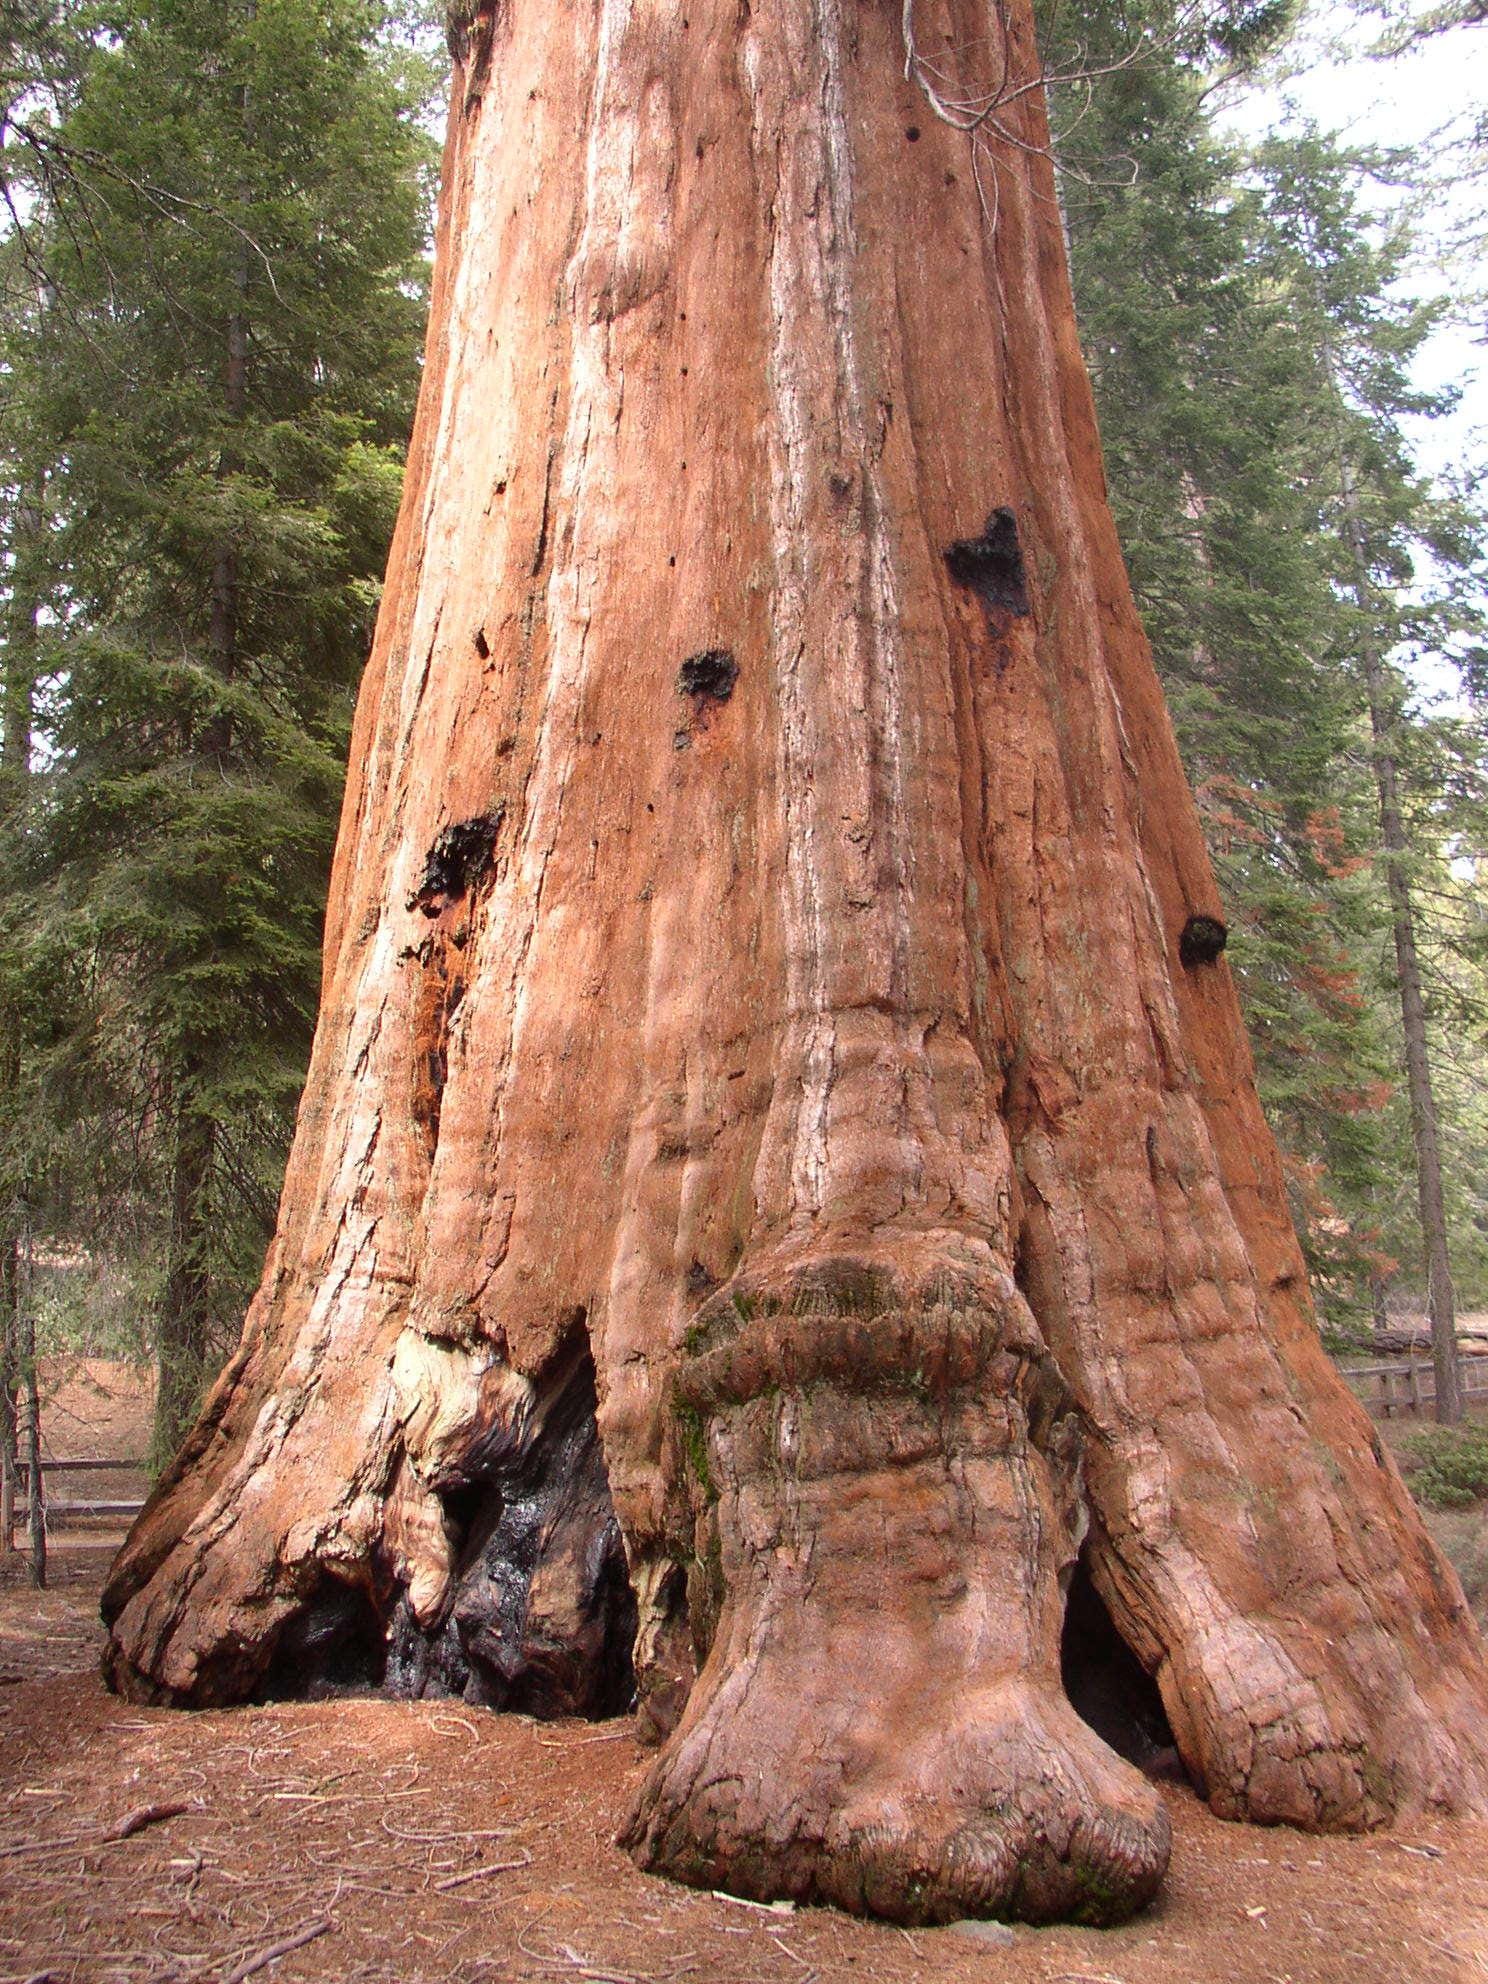 Giant Sequoia National Monument Rankings. This includes all Location